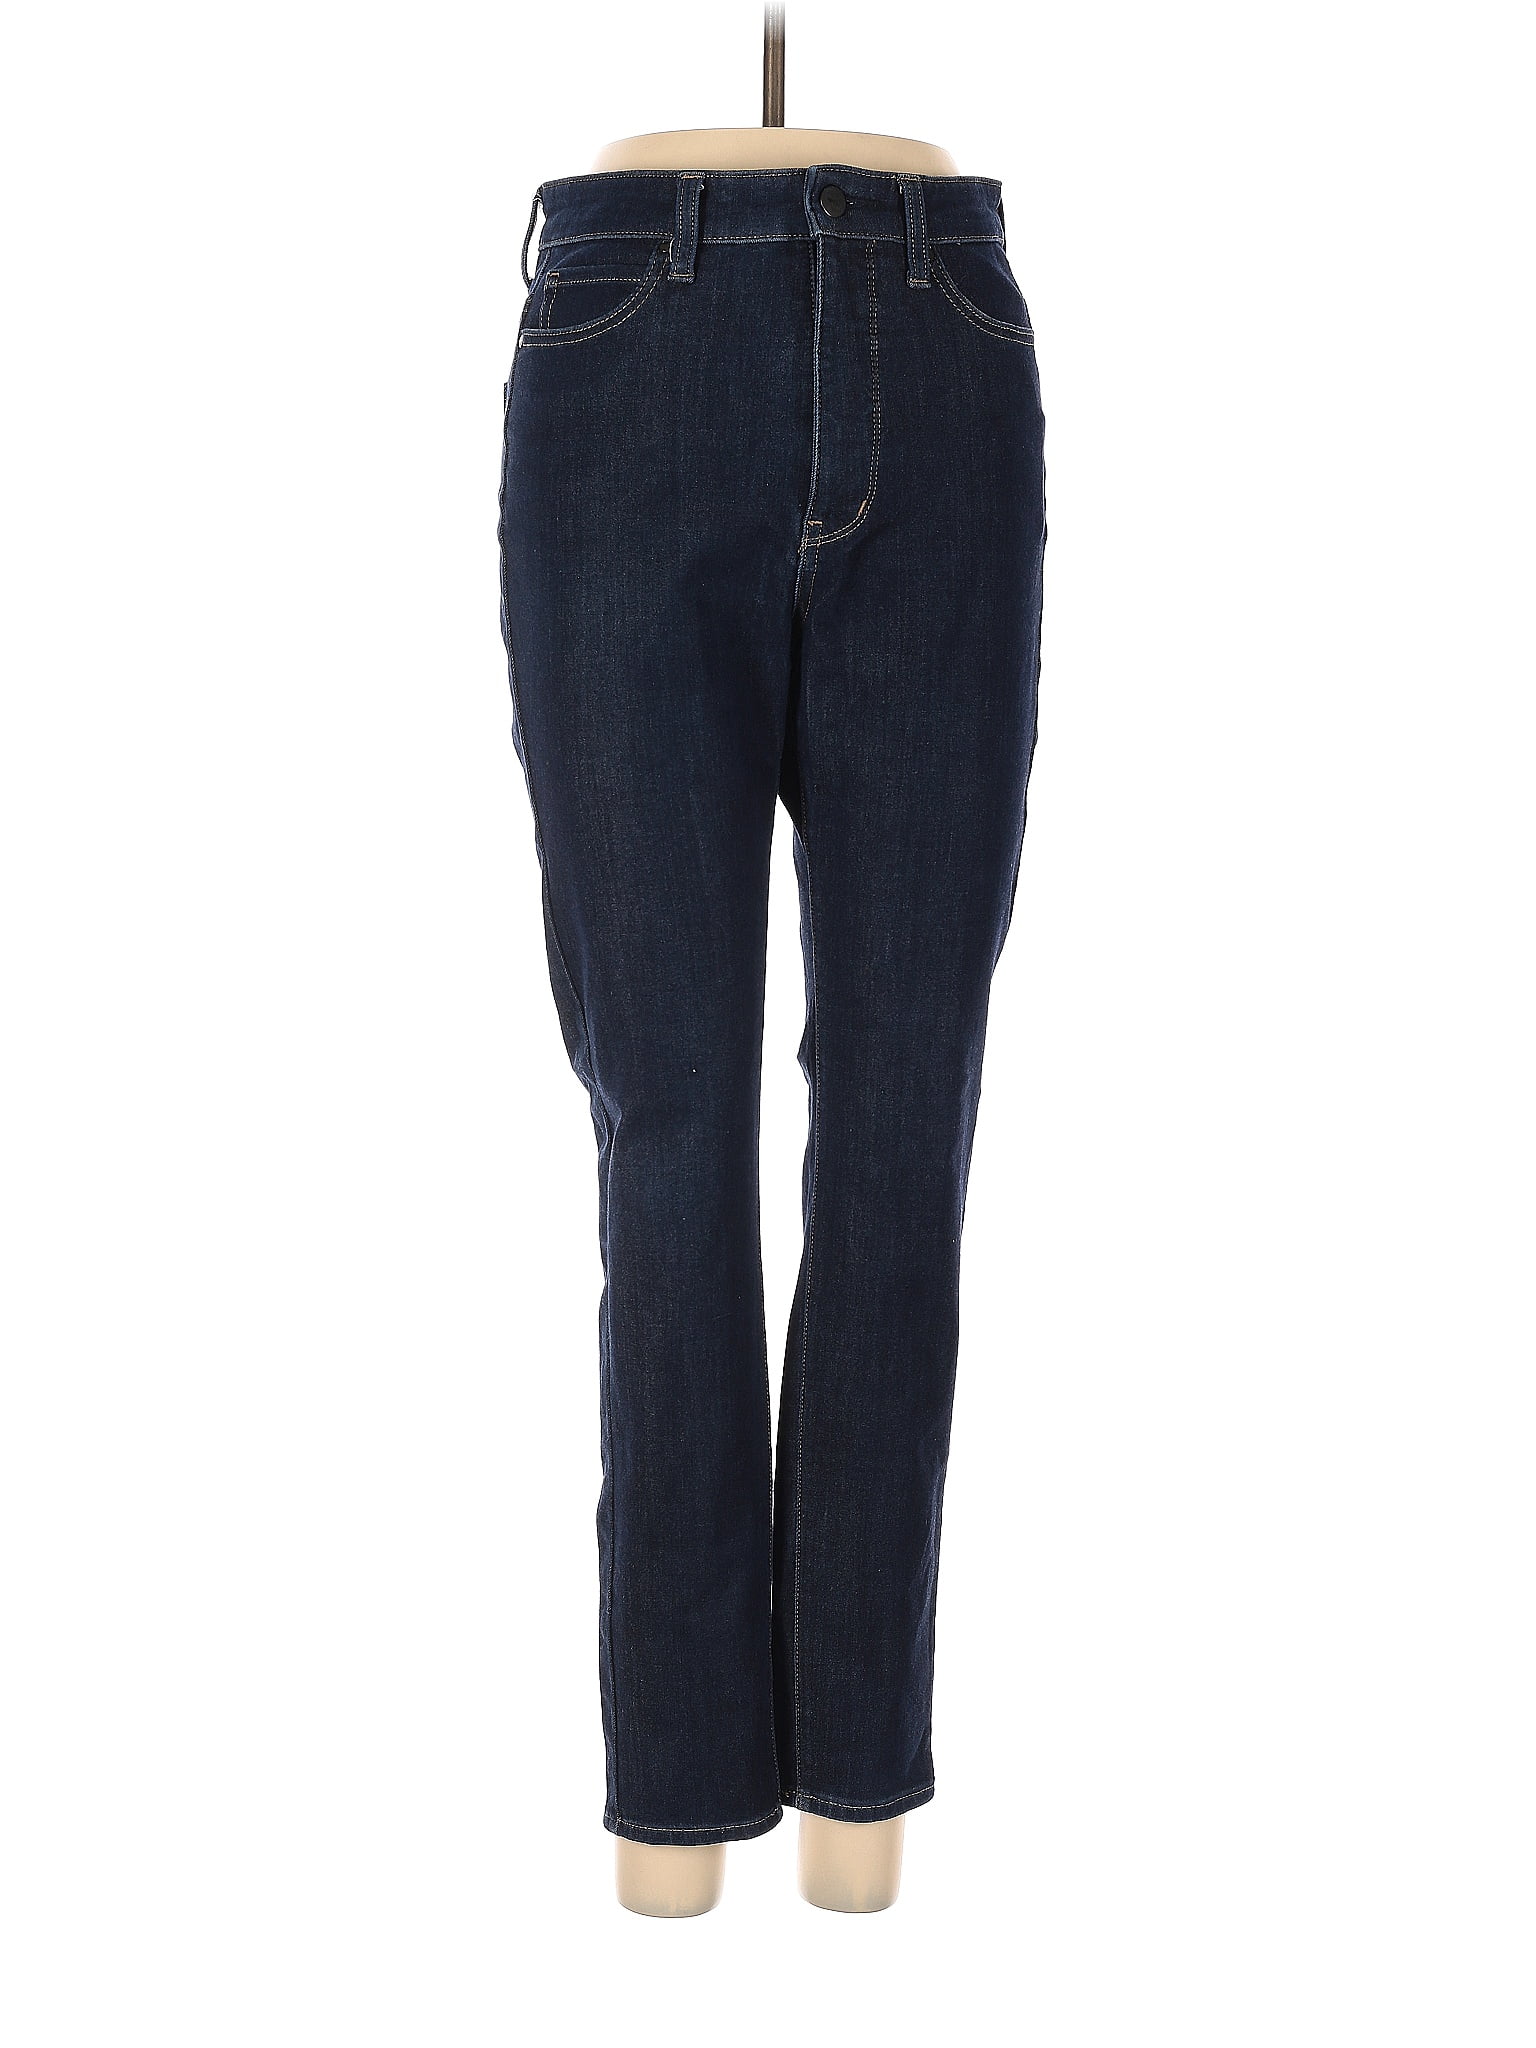 Uniqlo Solid Blue Jeggings Size XL - 52% off